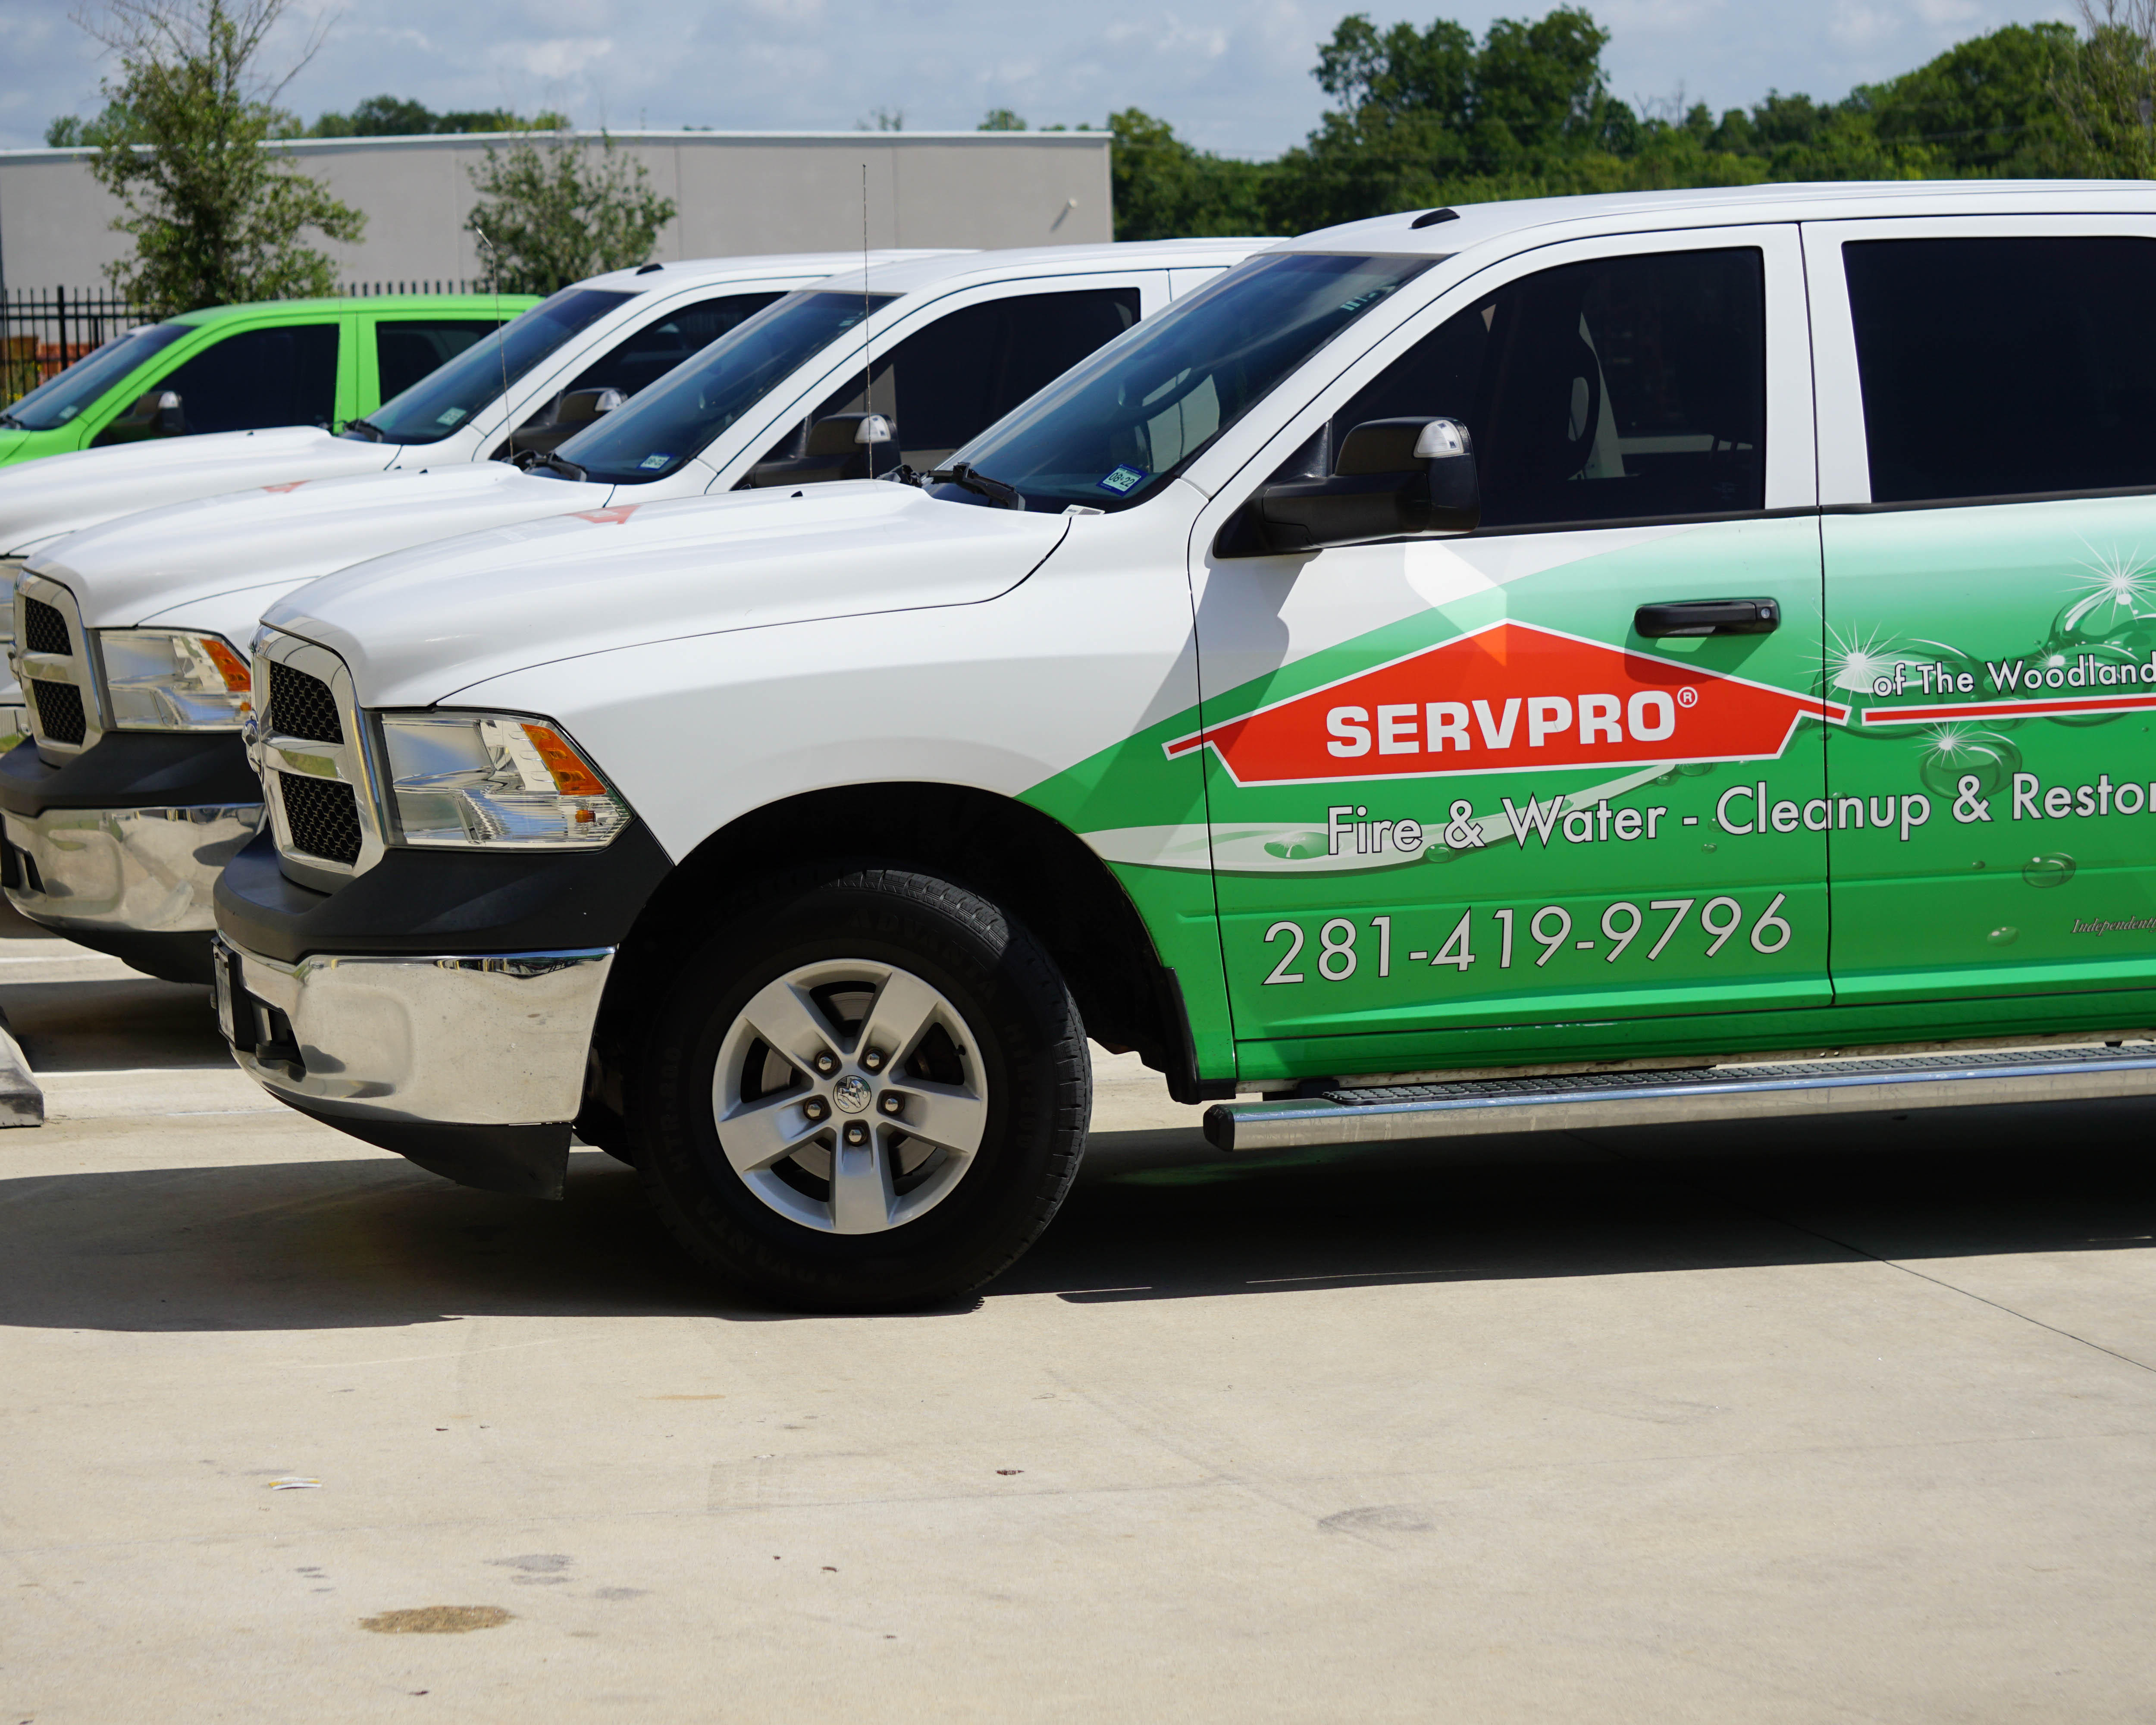 Our SERVPRO trucks are ready to go when you need us most, packed with necessary restoration equipment to get the job done right. SERVPRO of Tyler is ready to help you after water, fire or mold damage.